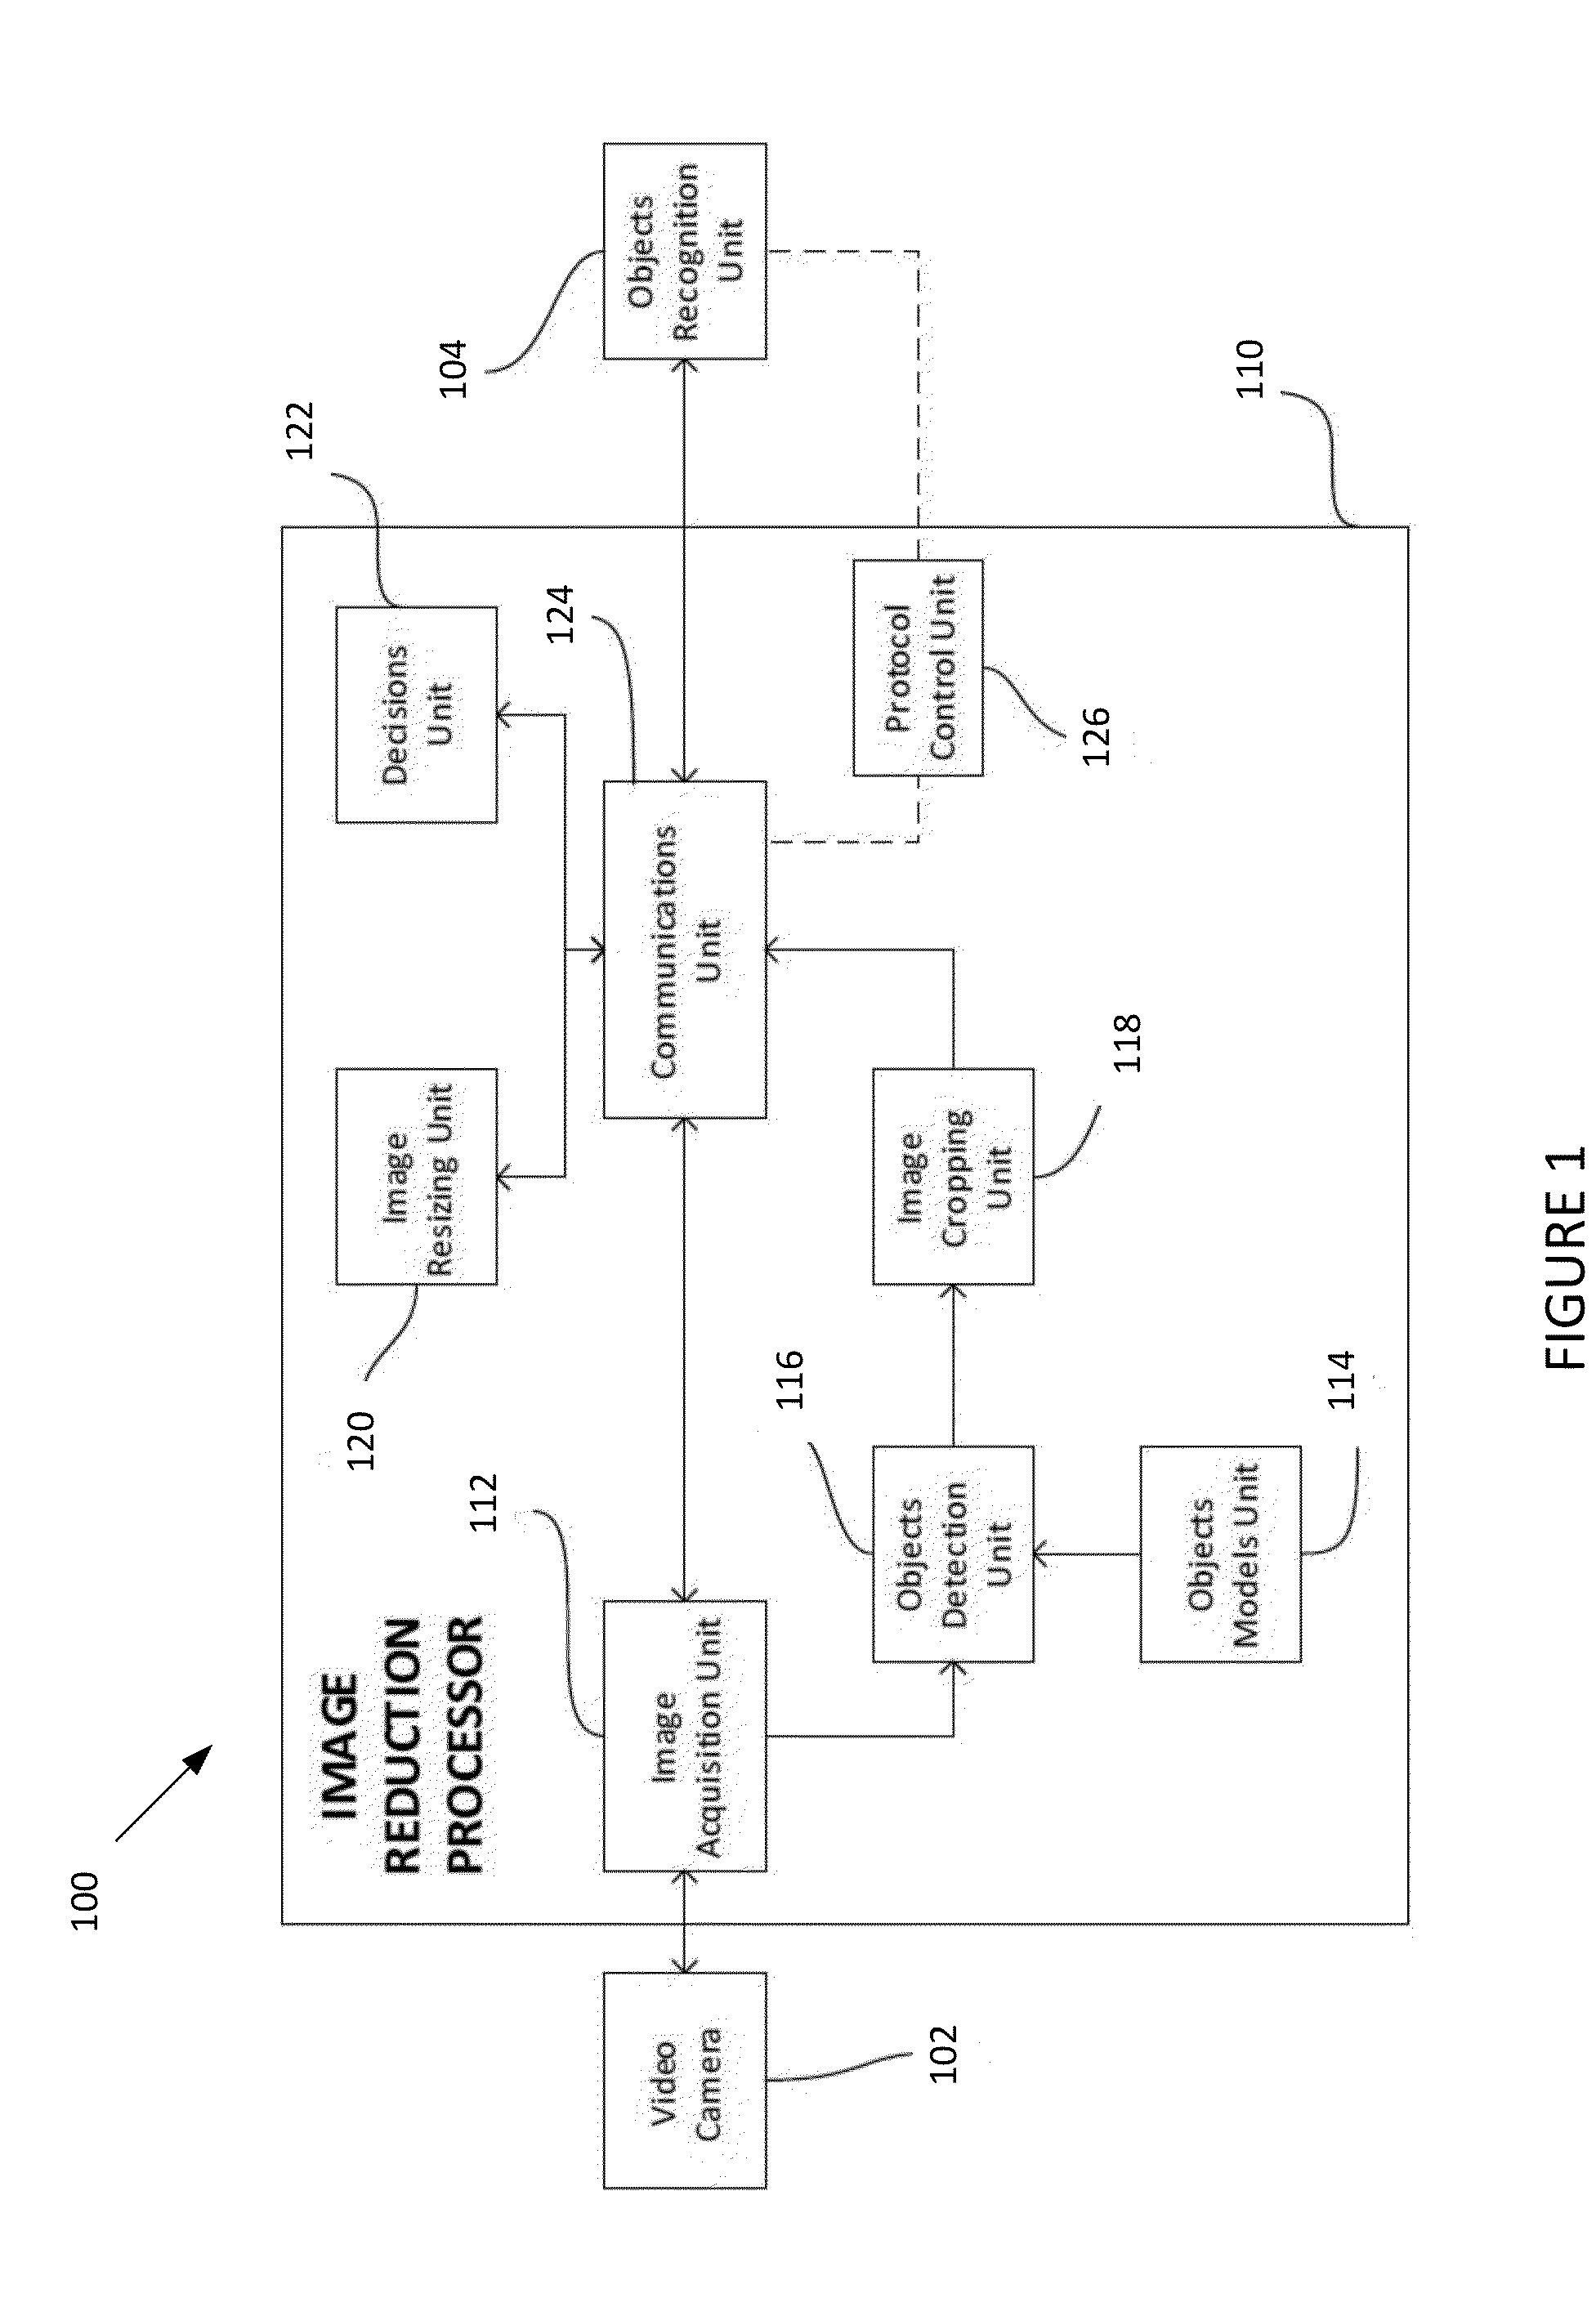 Method and system for data collection using processed image data